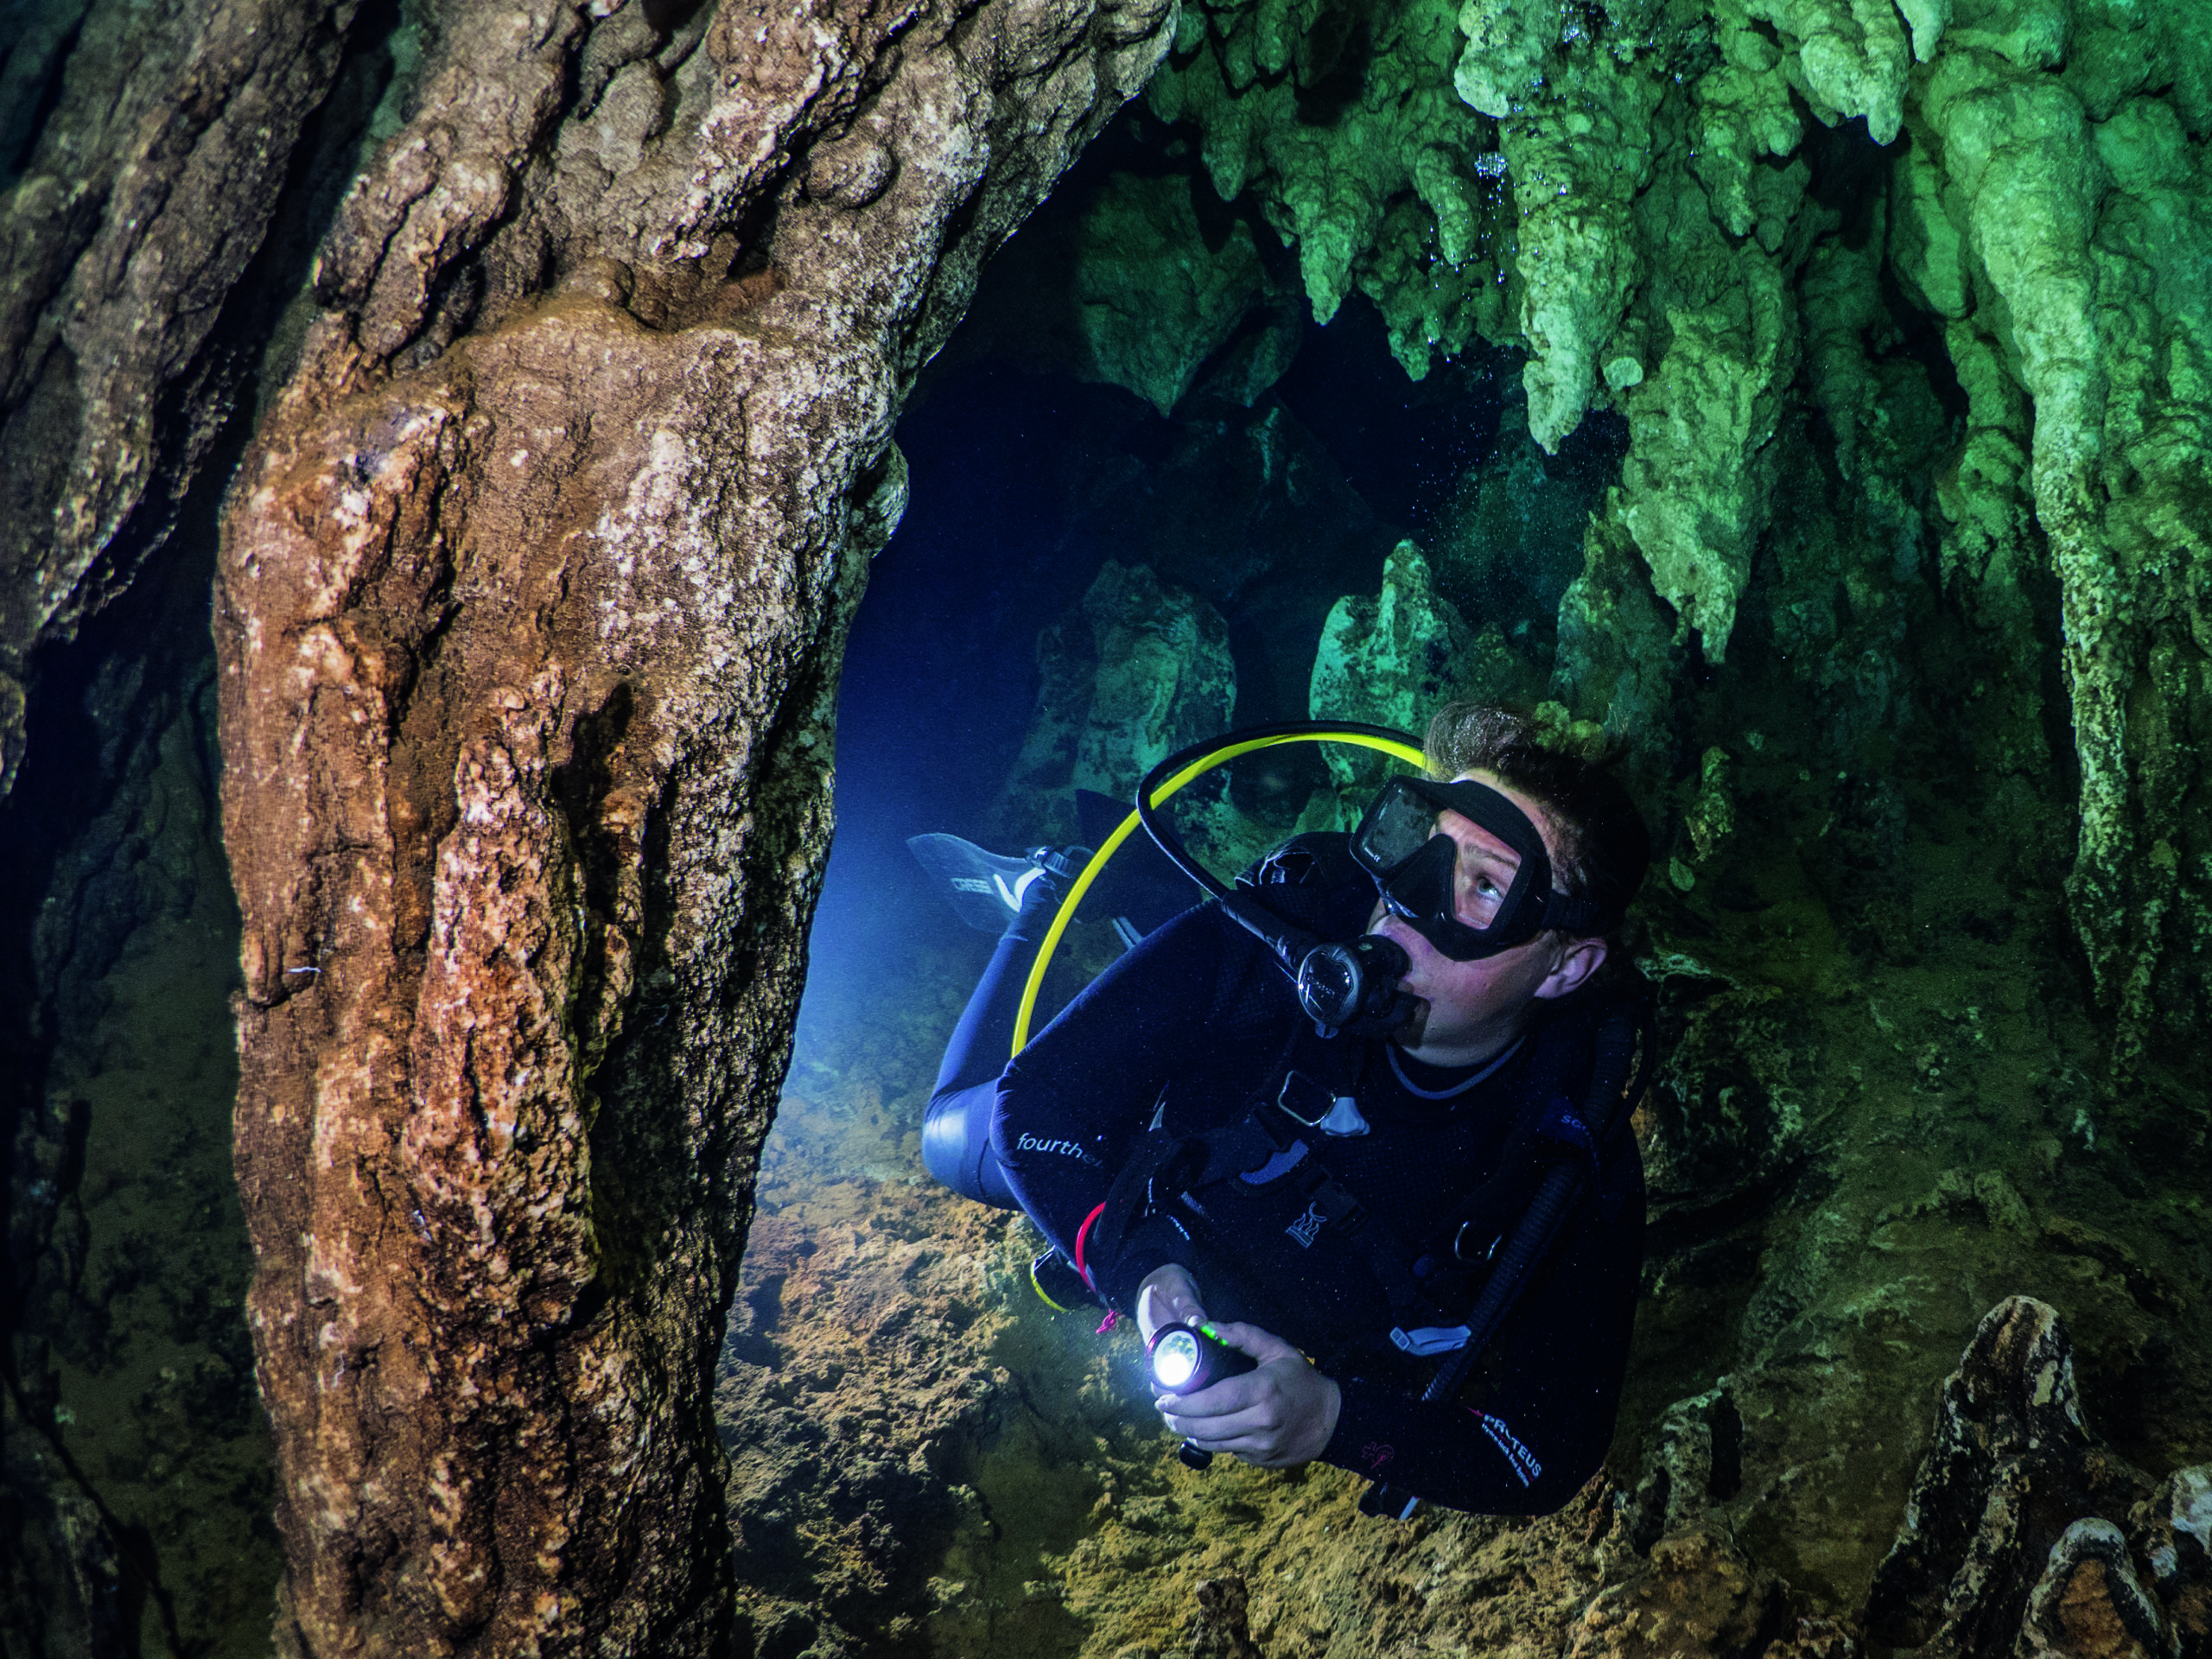 A diver swims by a stalactite in Chandelier cave, Palau, where you can find some amazing rock formations. When using a diver in your image, make sure the eye line of your model goes to a focal point in your shot and not into the camera.